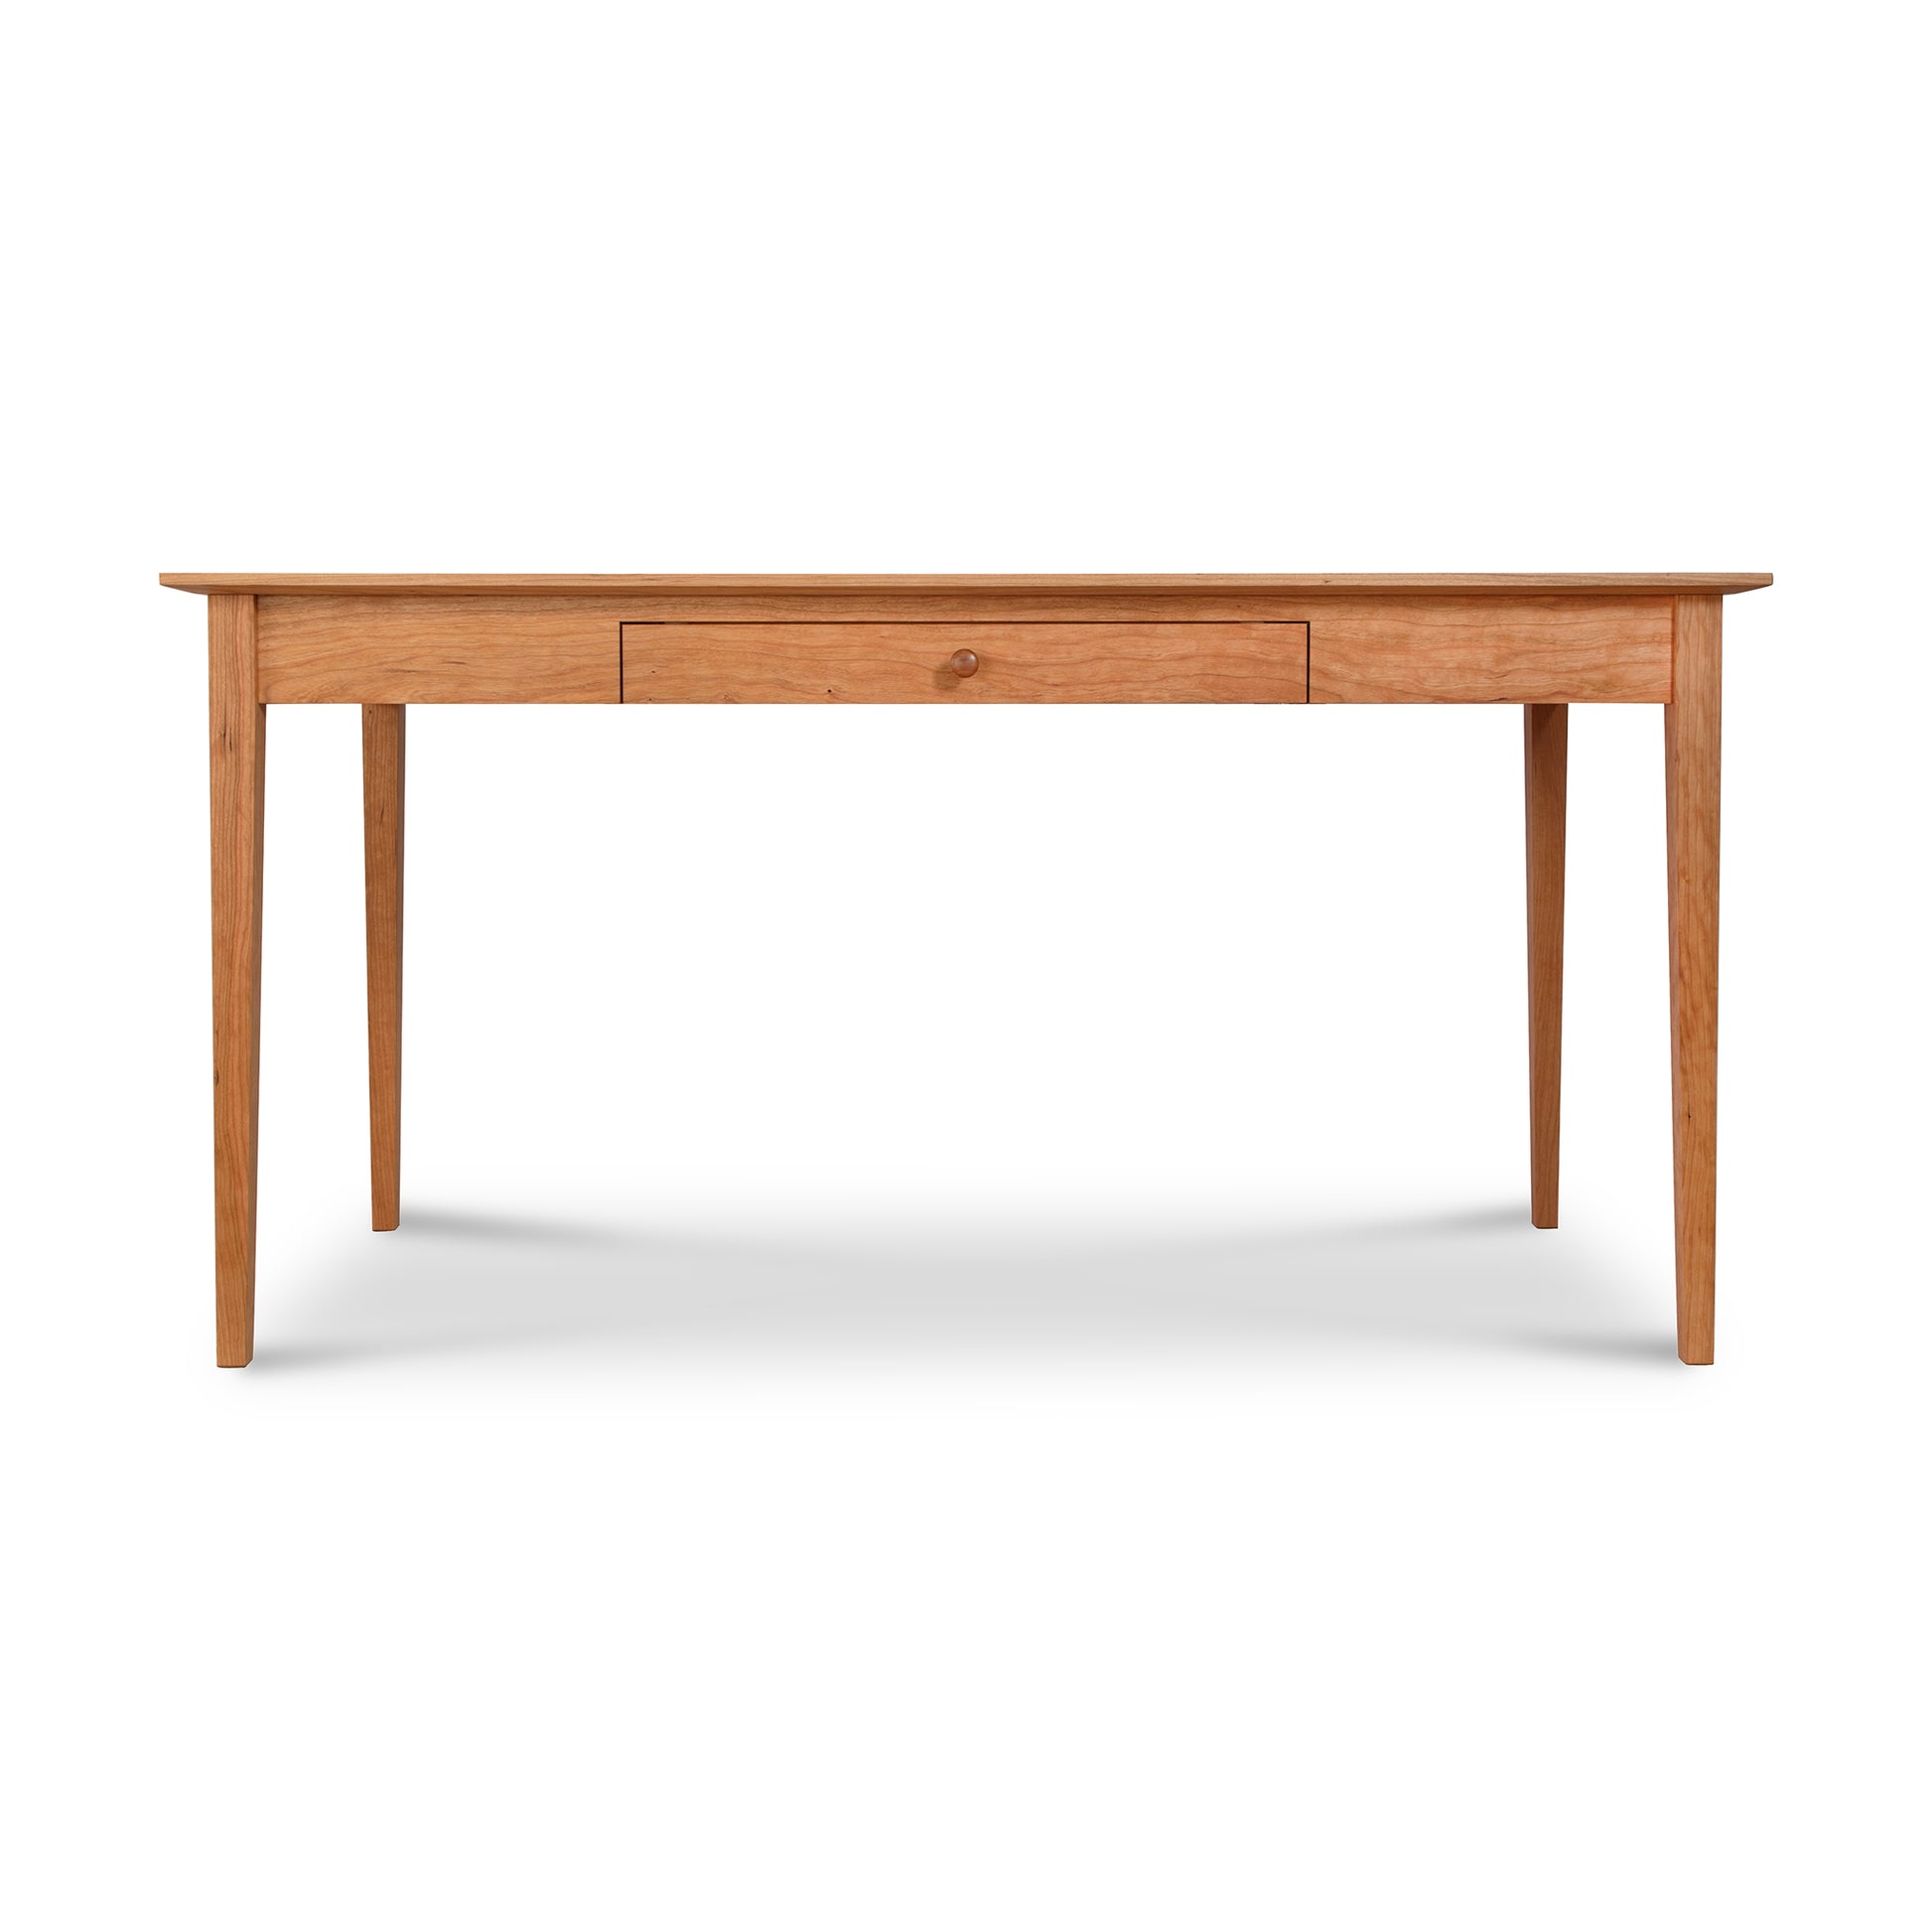 Maple Corner Woodworks' American Shaker Writing Desk, sustainably harvested hardwood table with a single centered drawer, standing on four straight legs, isolated on a white background.